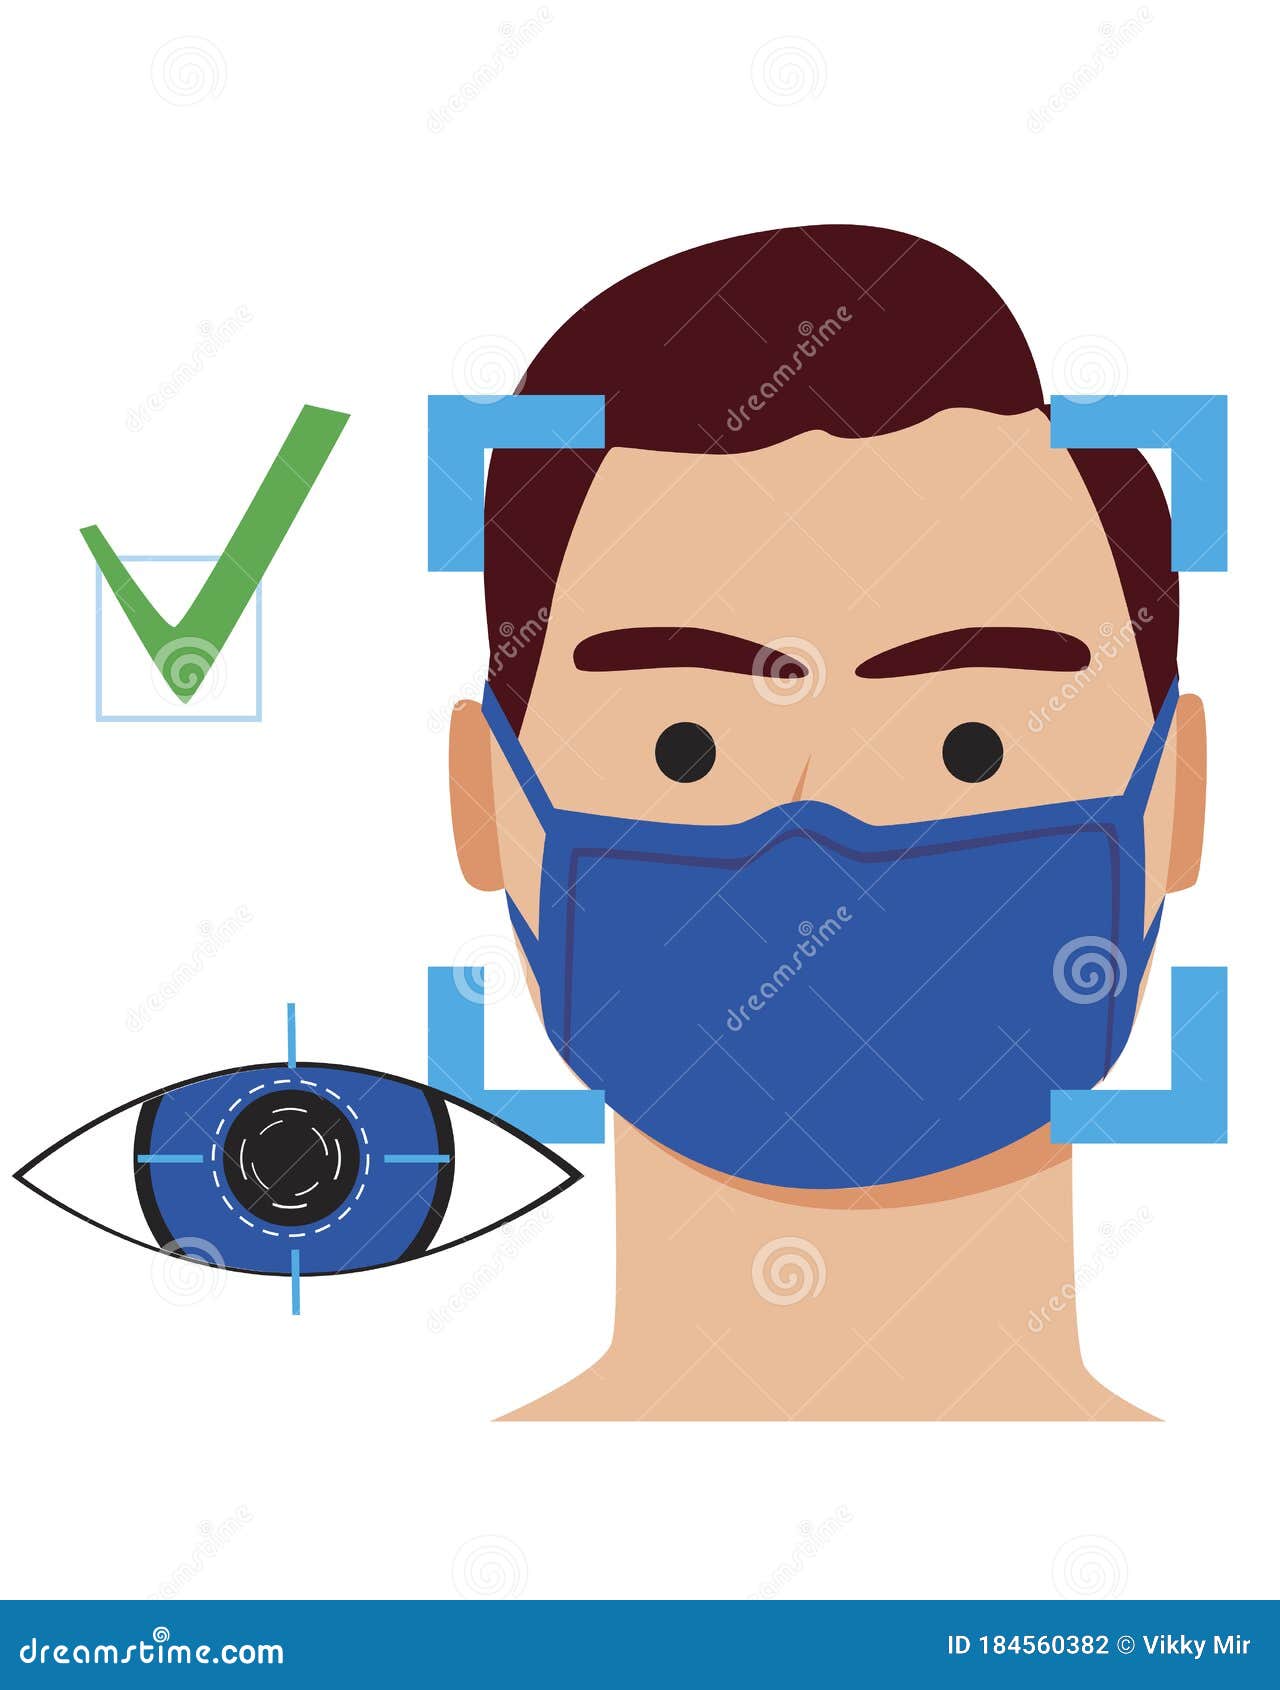 recognition of the face and eyes of a man in a medical mask, saying stock   as a concept of identifying a person